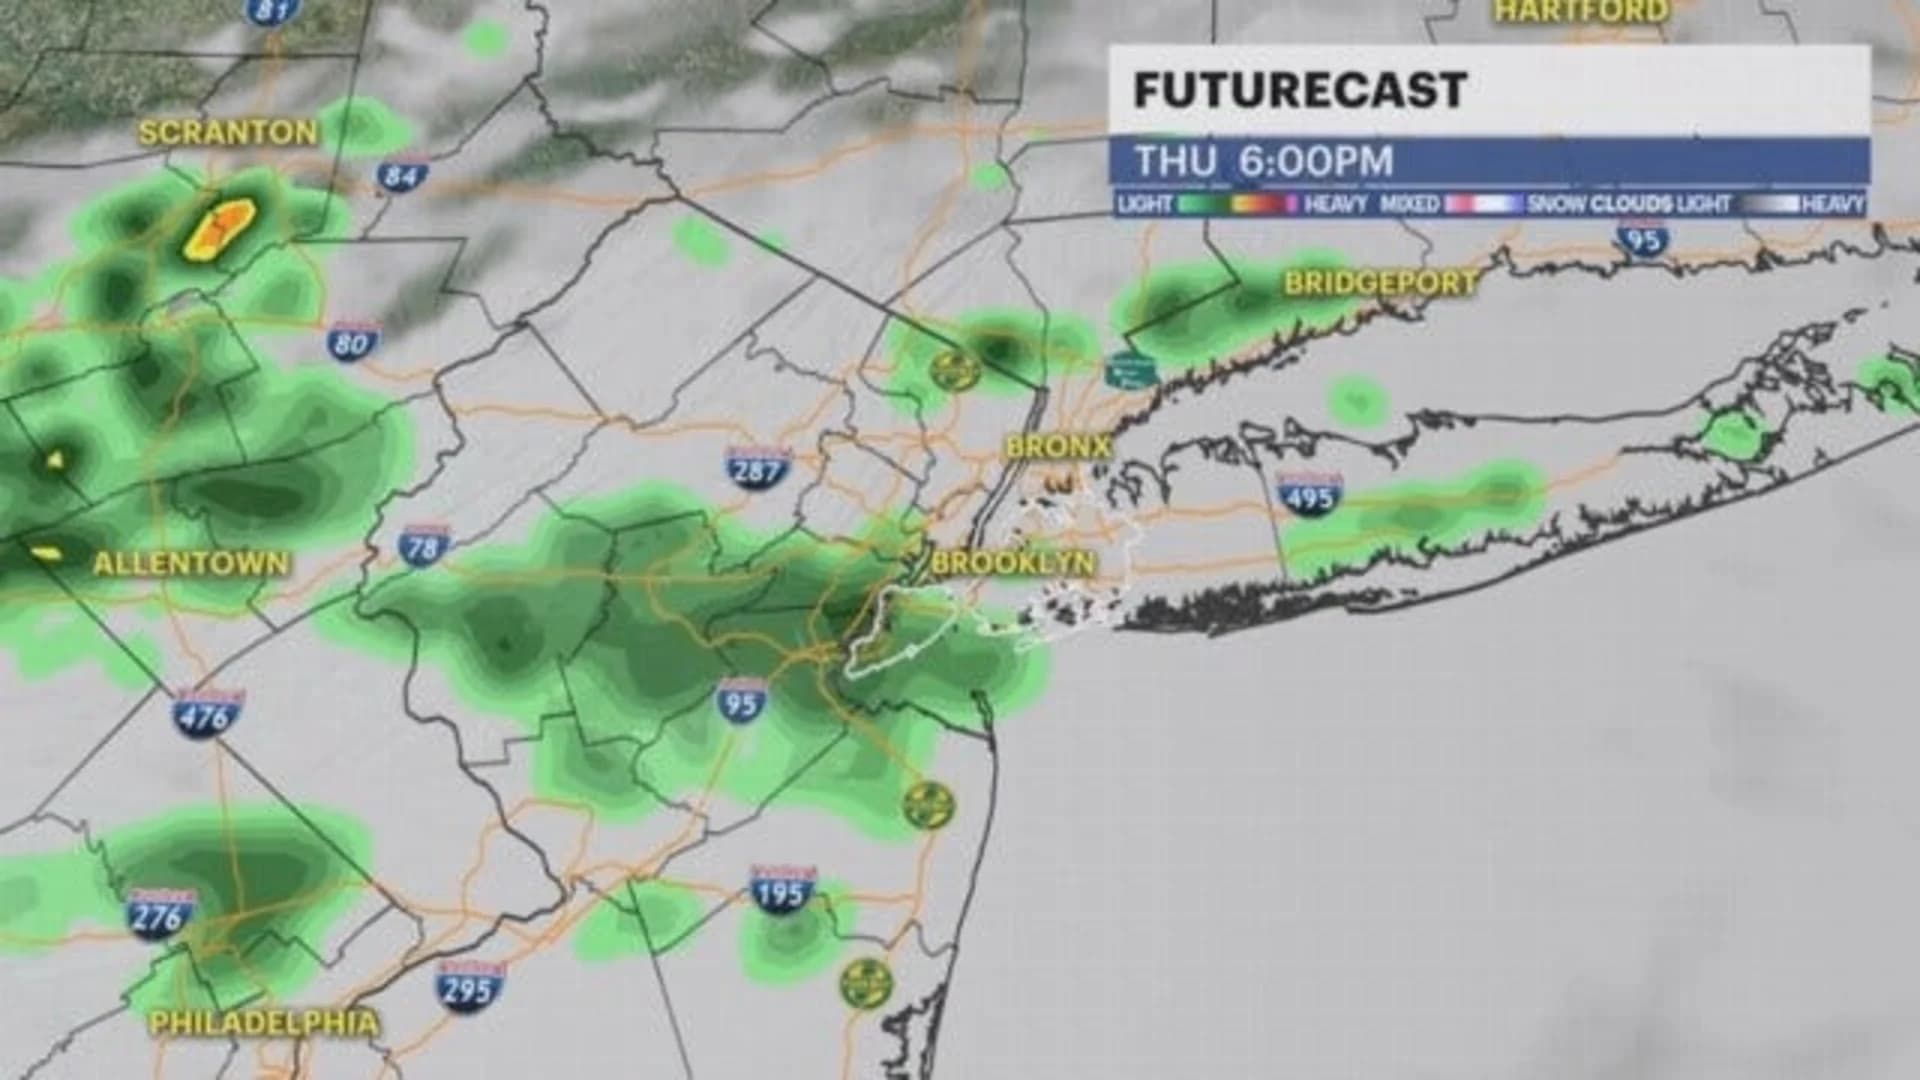 Pop-up thunderstorms across NYC could cause flash flooding